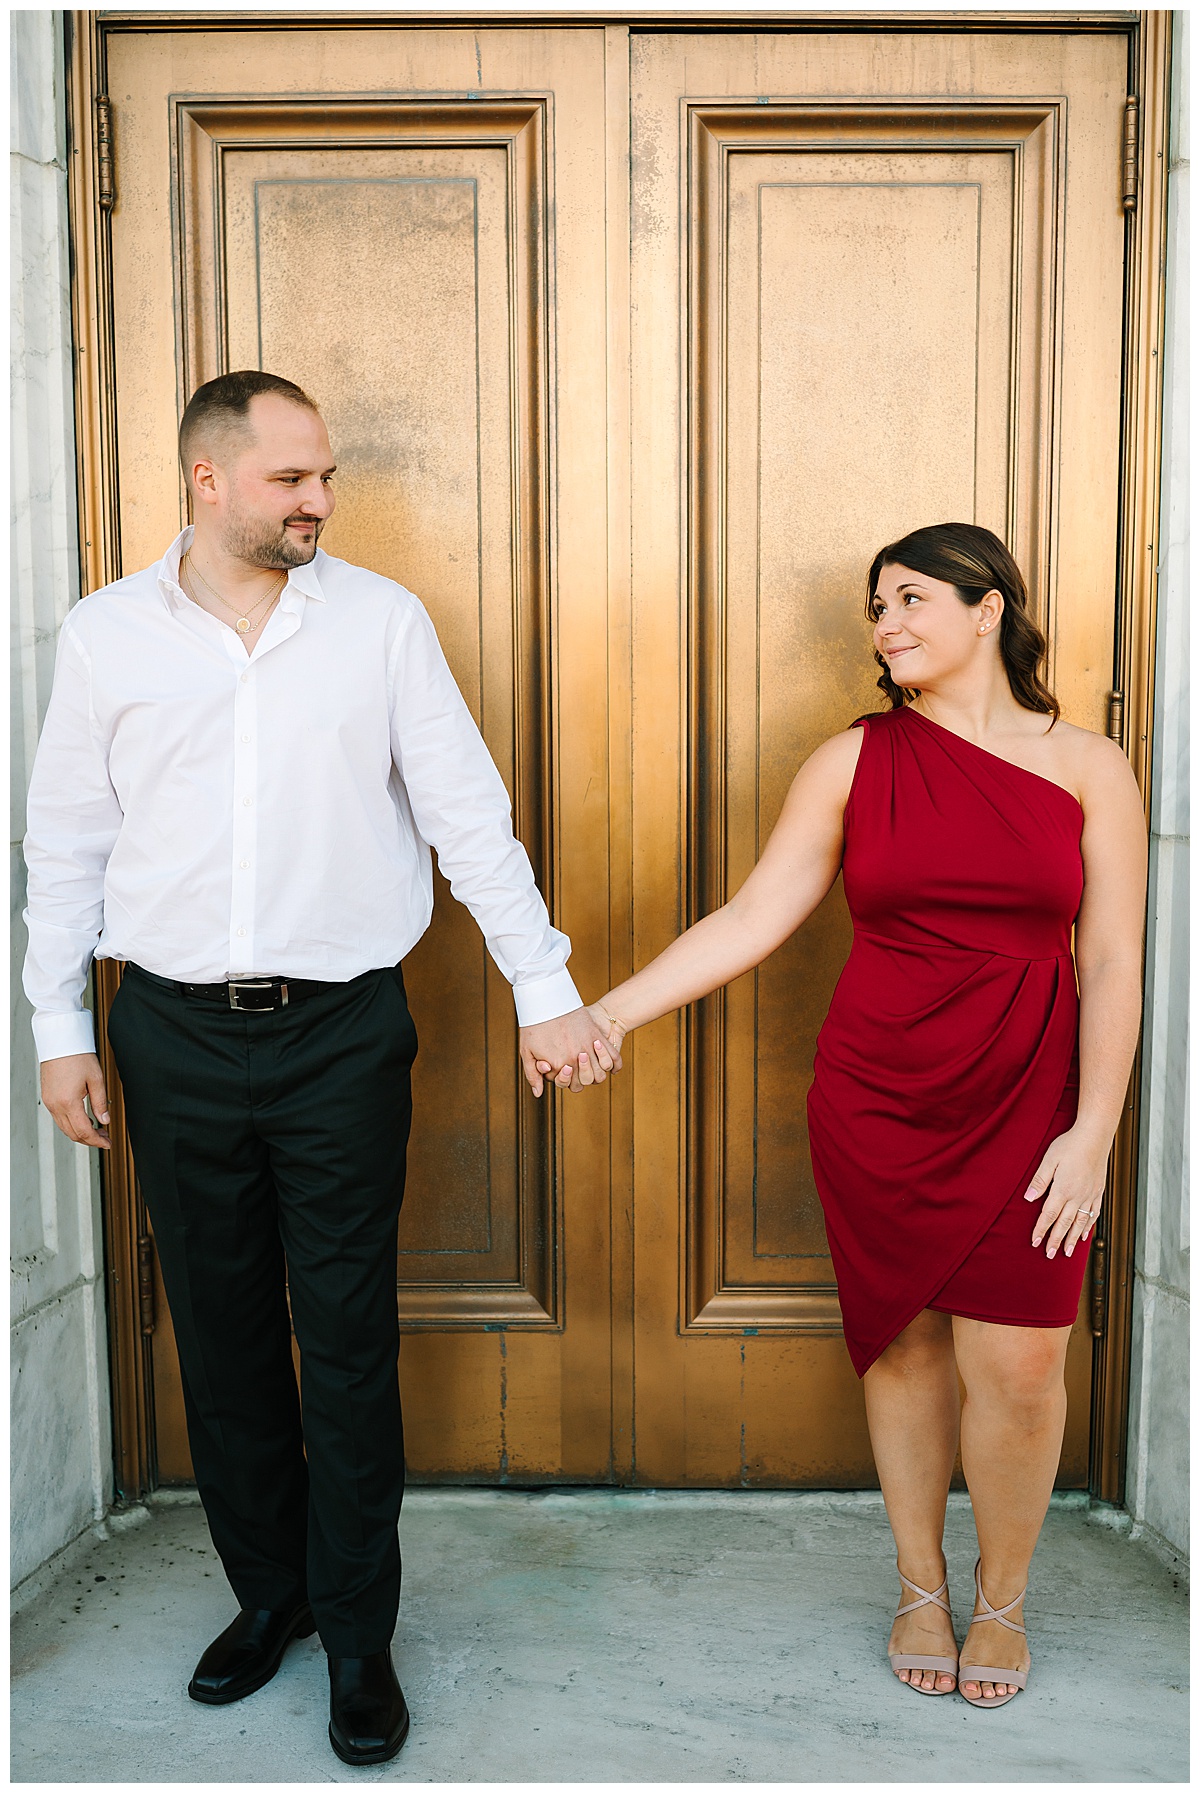 Holding hands, couple looks at each other for Michigan Wedding Photographer